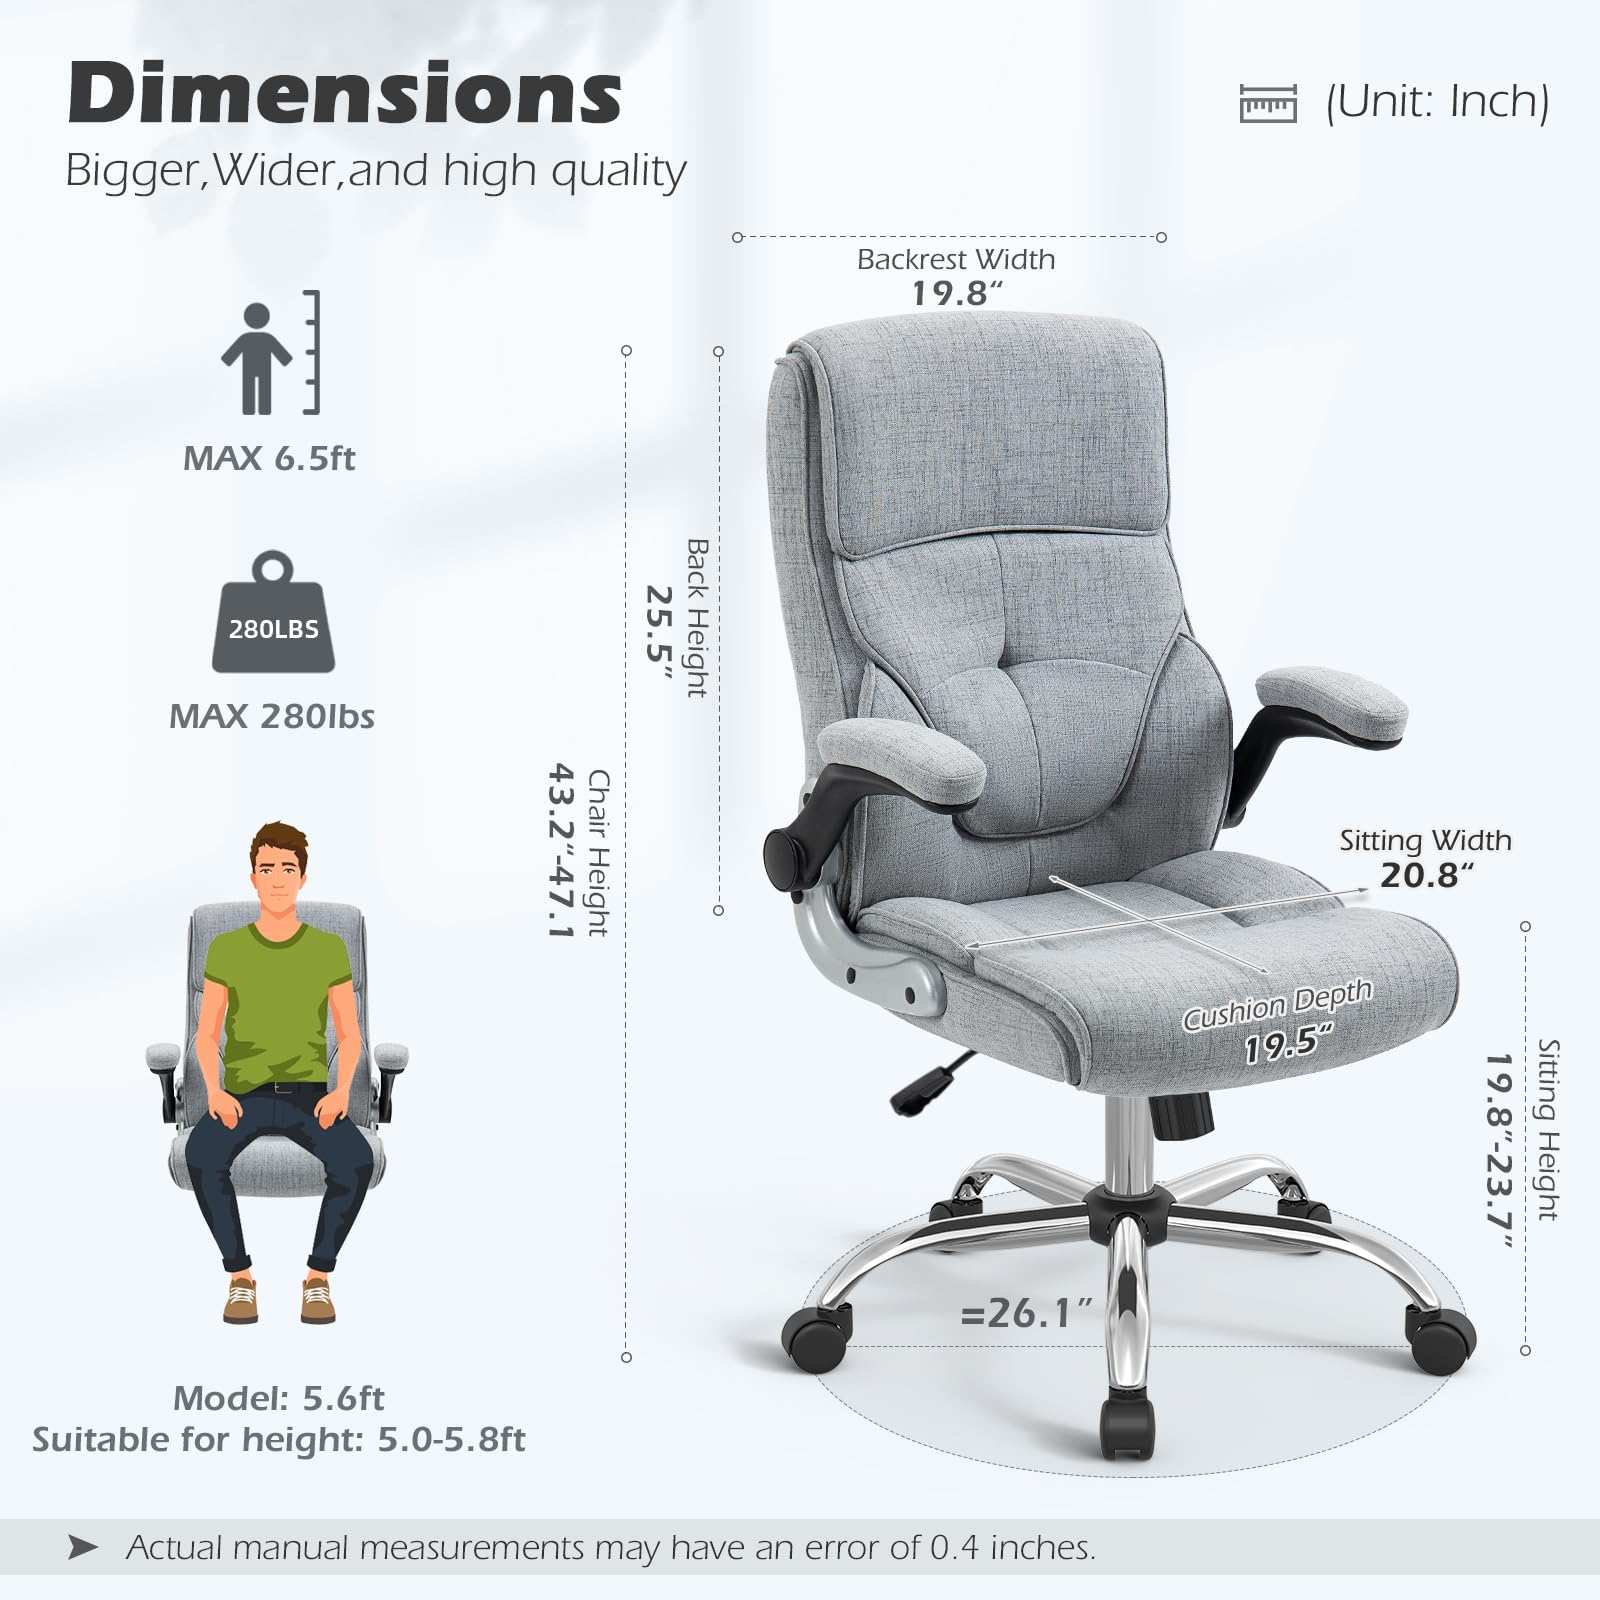 YAMASORO Ergonomic Executive Office Chair with Wheels,Linen Fabric Home Office Desk Chairs, High Back Computer Chairs with Lumbar Support,Grey